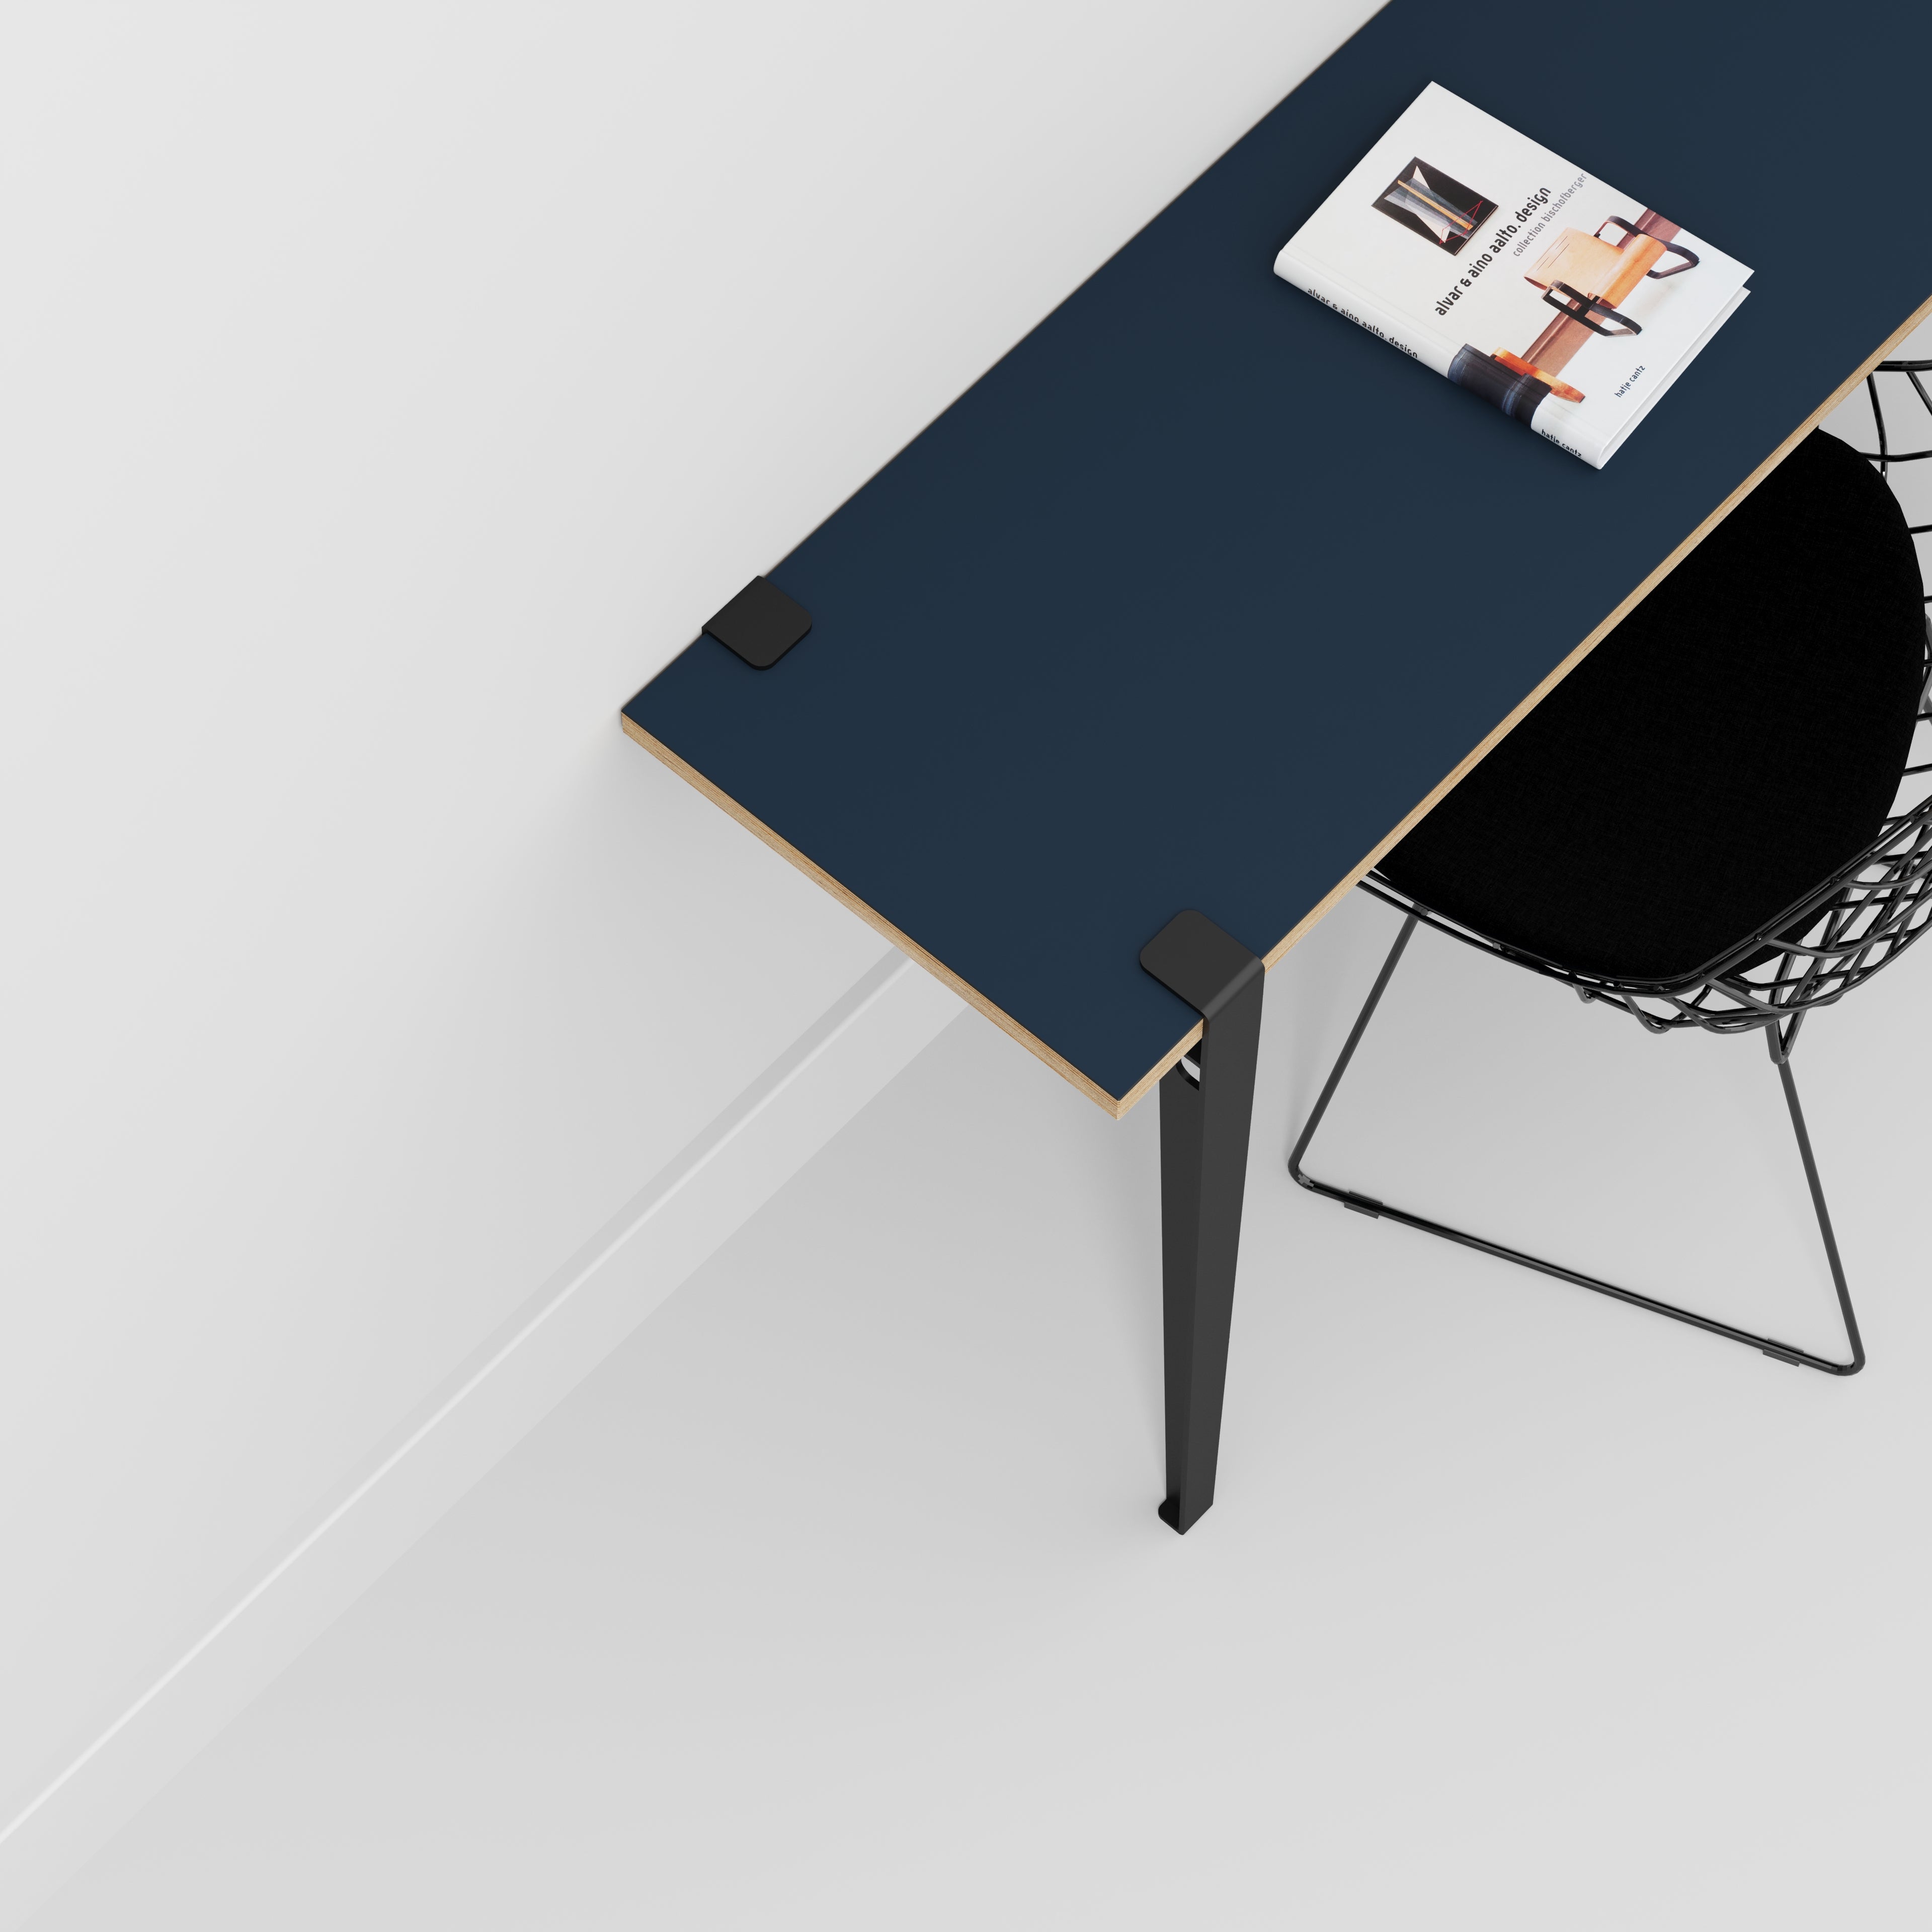 Wall Desk with Black Tiptoe Legs and Brackets - Formica Night Sea Blue - 1200(w) x 400(d) x 750(h)